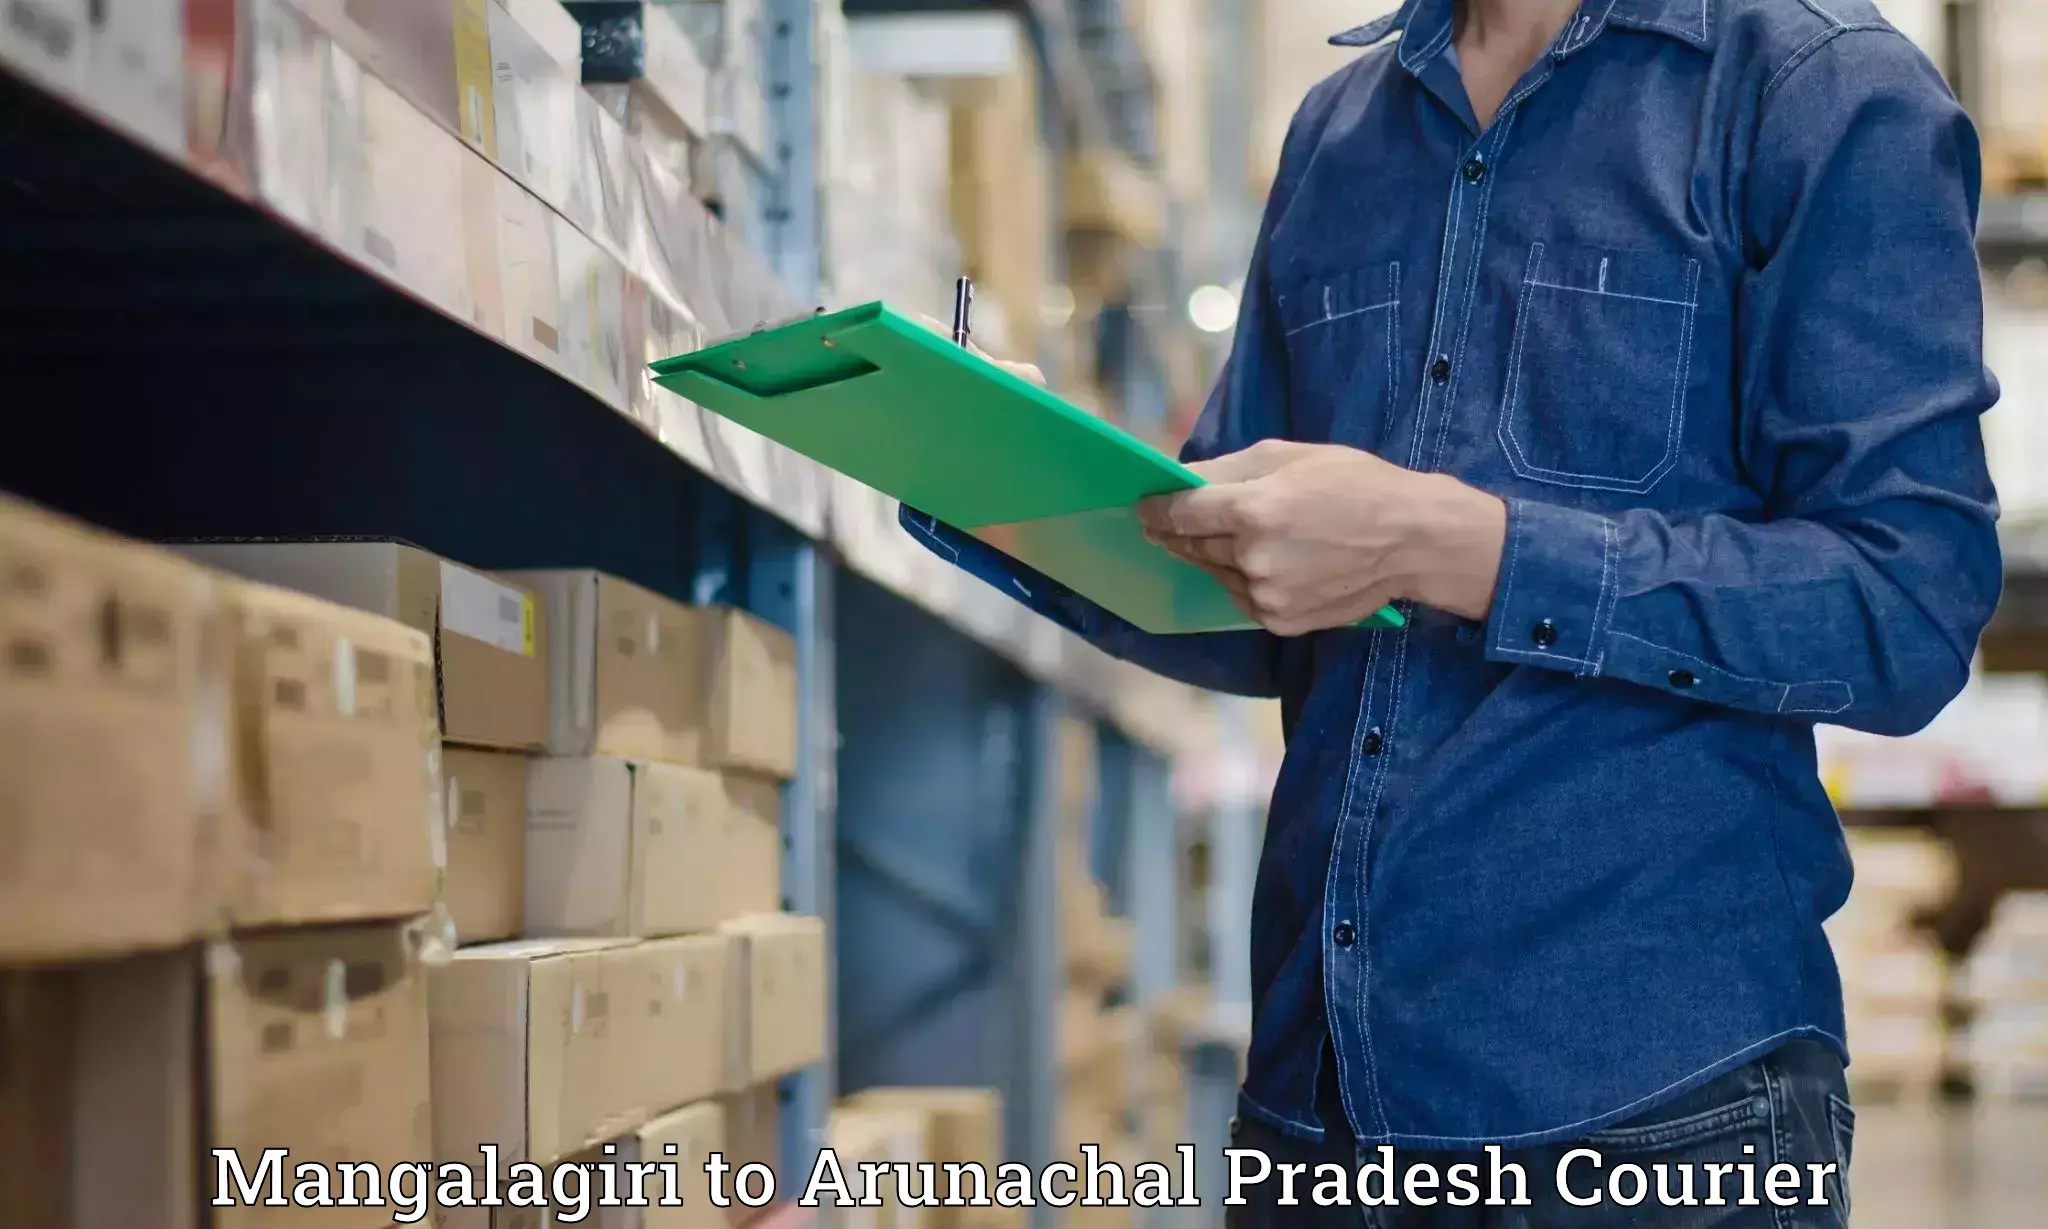 Ocean freight courier Mangalagiri to Papum Pare